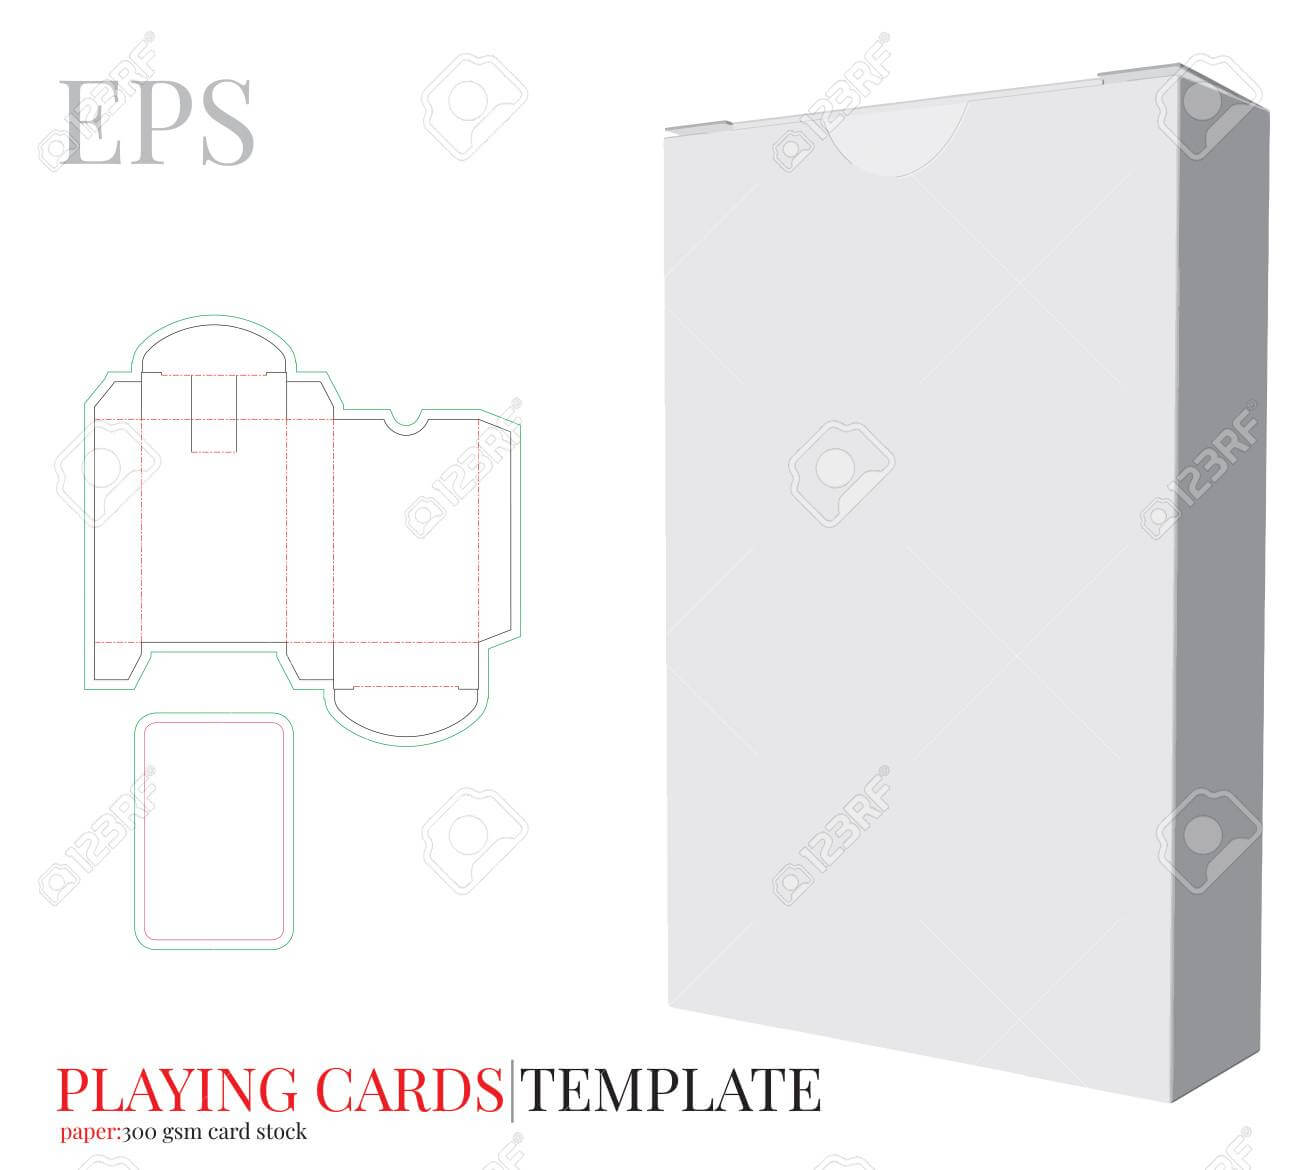 Playing Cards Template And Playing Cards Box Template Vector.. With Blank Playing Card Template